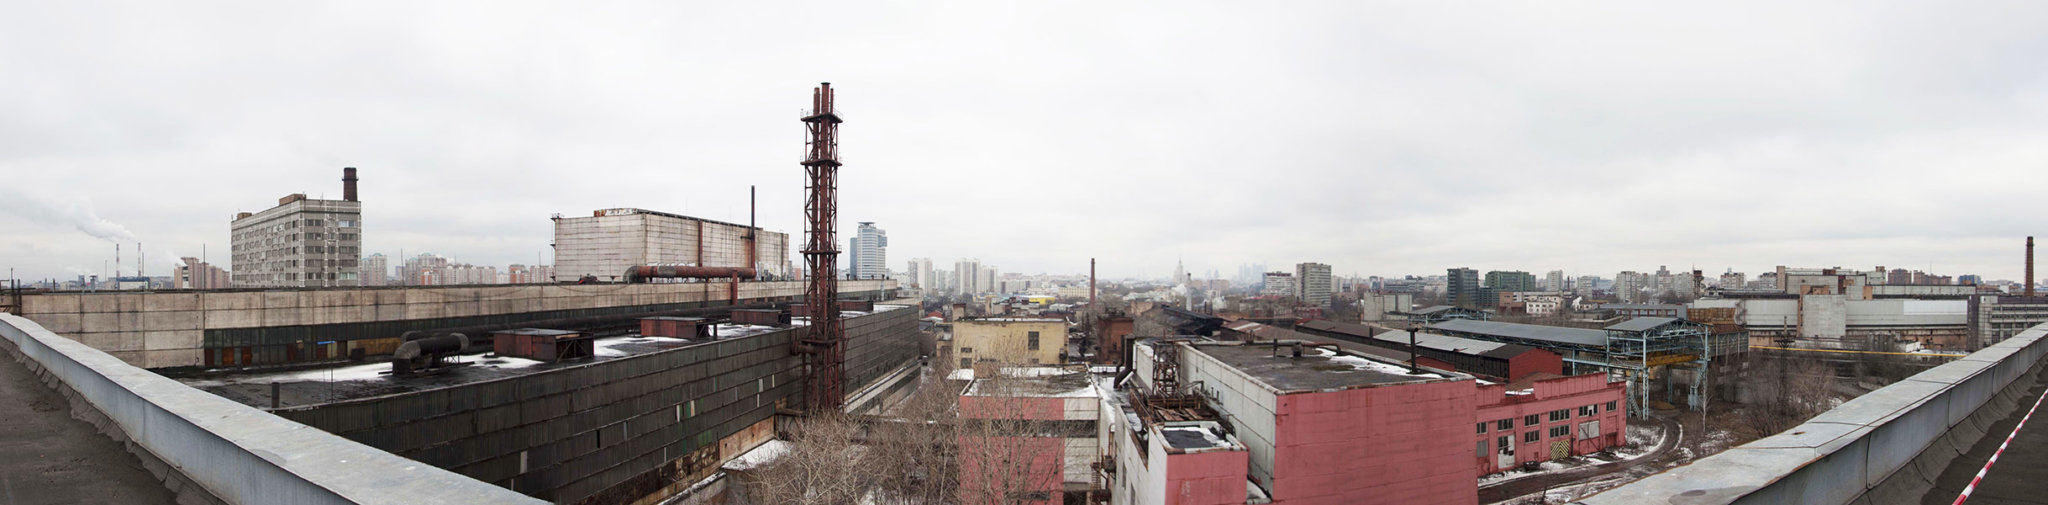 context panorama for serp and molot in moscow russia